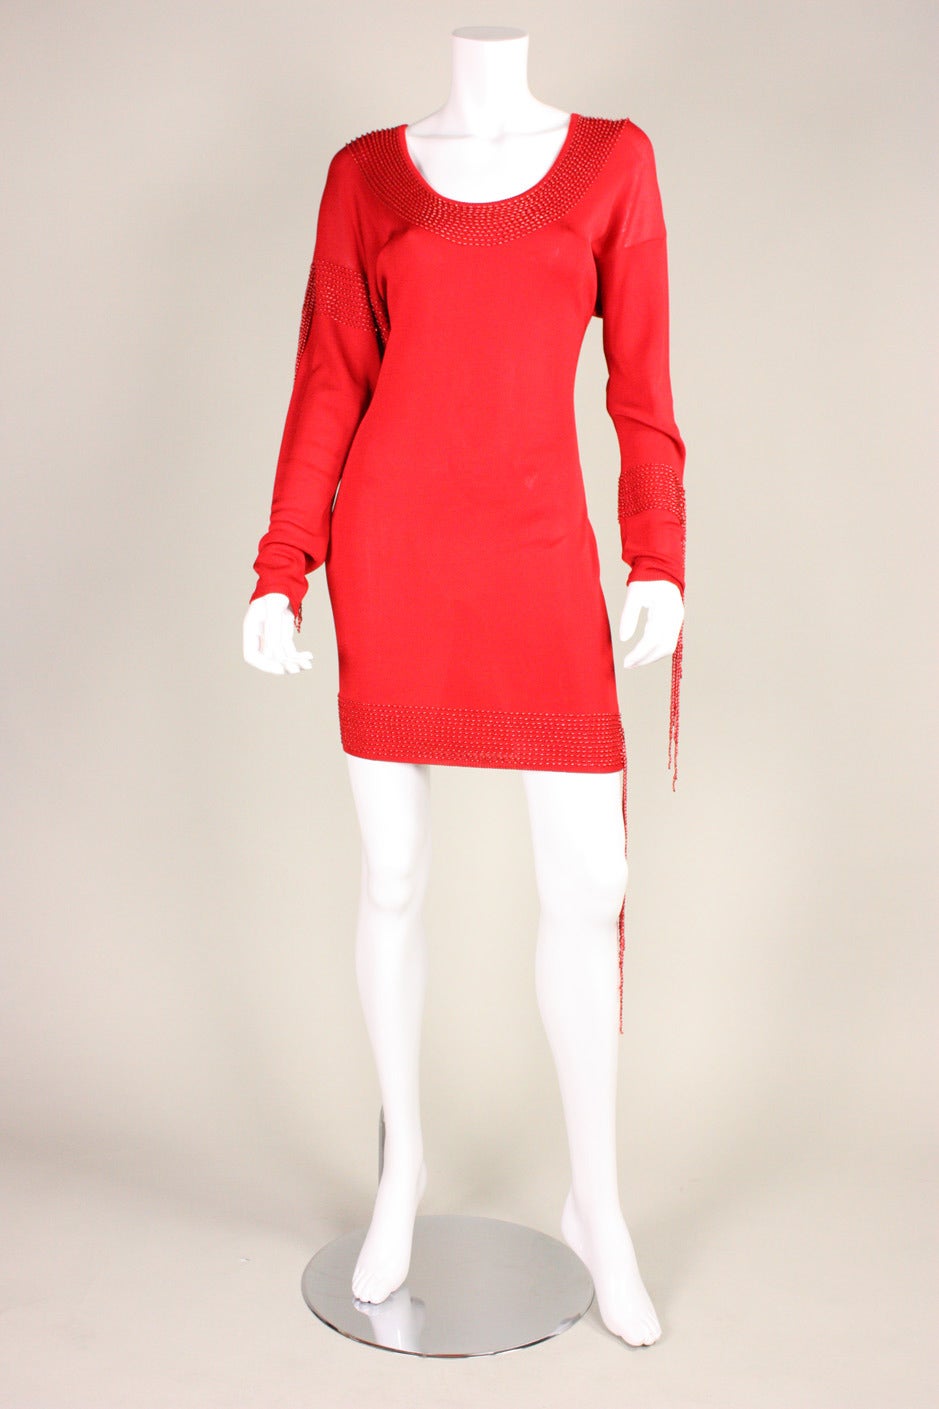 Bodycon dress from Krizia dates to the 1980's and is made of a soft red knit fabric. Beading around neckline, hem, and sleeves.  Strands of beaded fringe cascade down the body.  Unlined.  No closures.  100% Rayon knit.

Labeled size